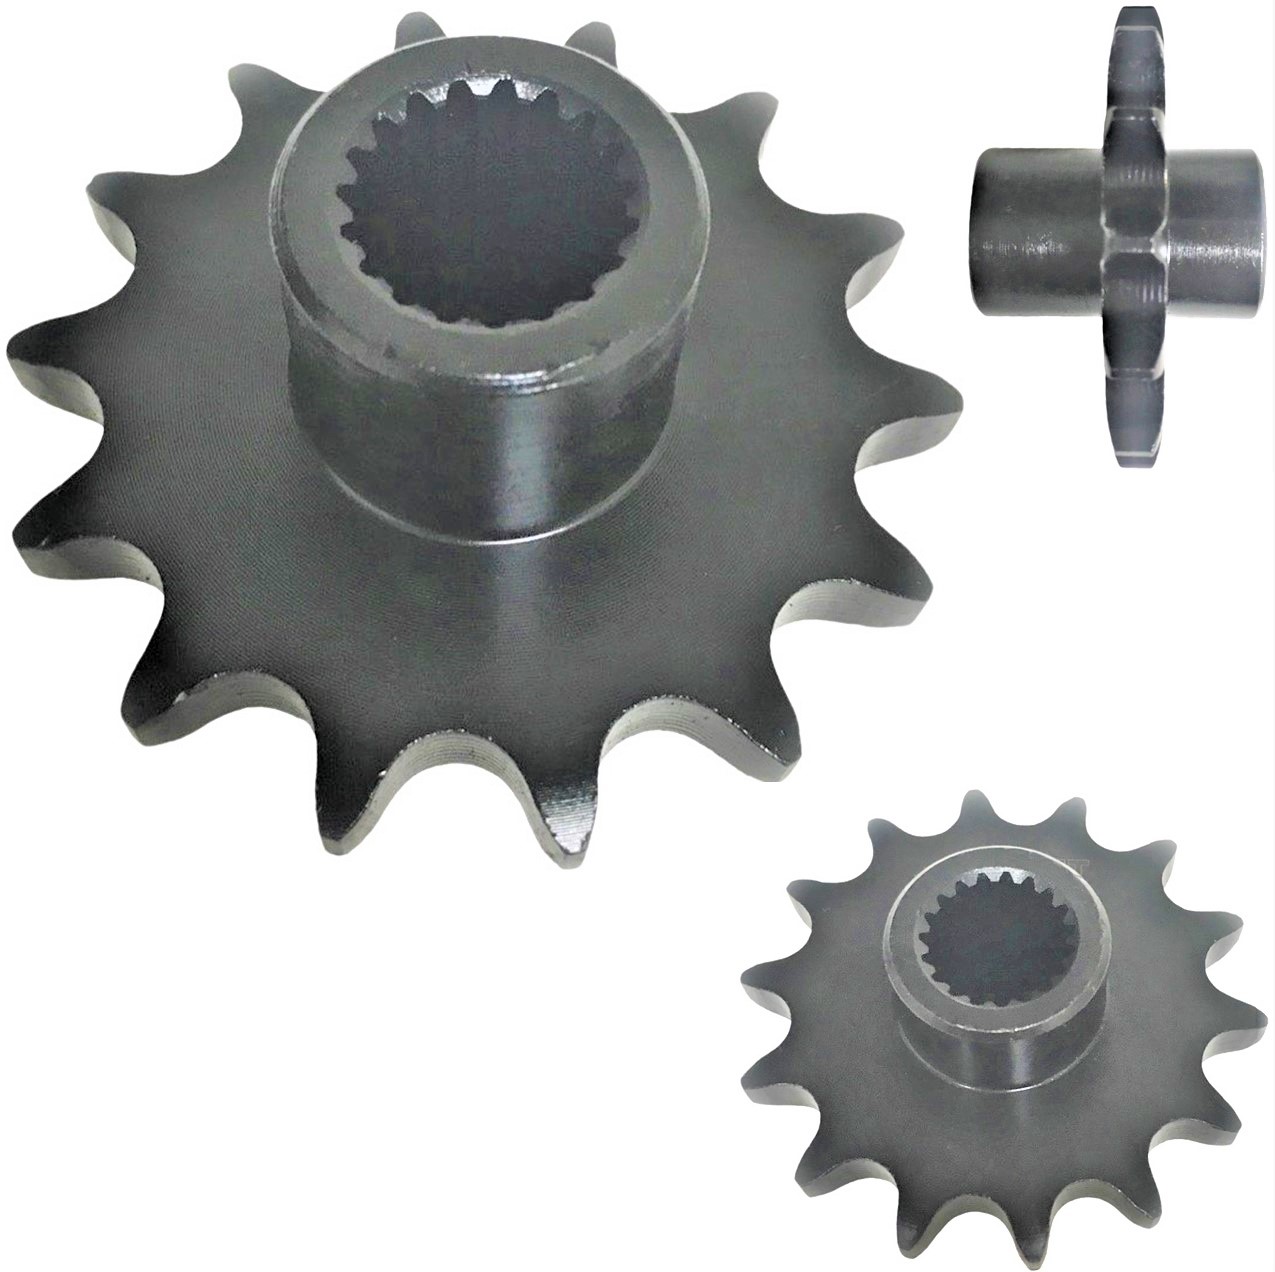 Front Sprocket #530 14th Fits Tao Tao 150GK, ATK150,Arrow 150, + More Splines=19, ID=20mm, Total Width=48mm Fits many 150-300cc ATVs - Click Image to Close